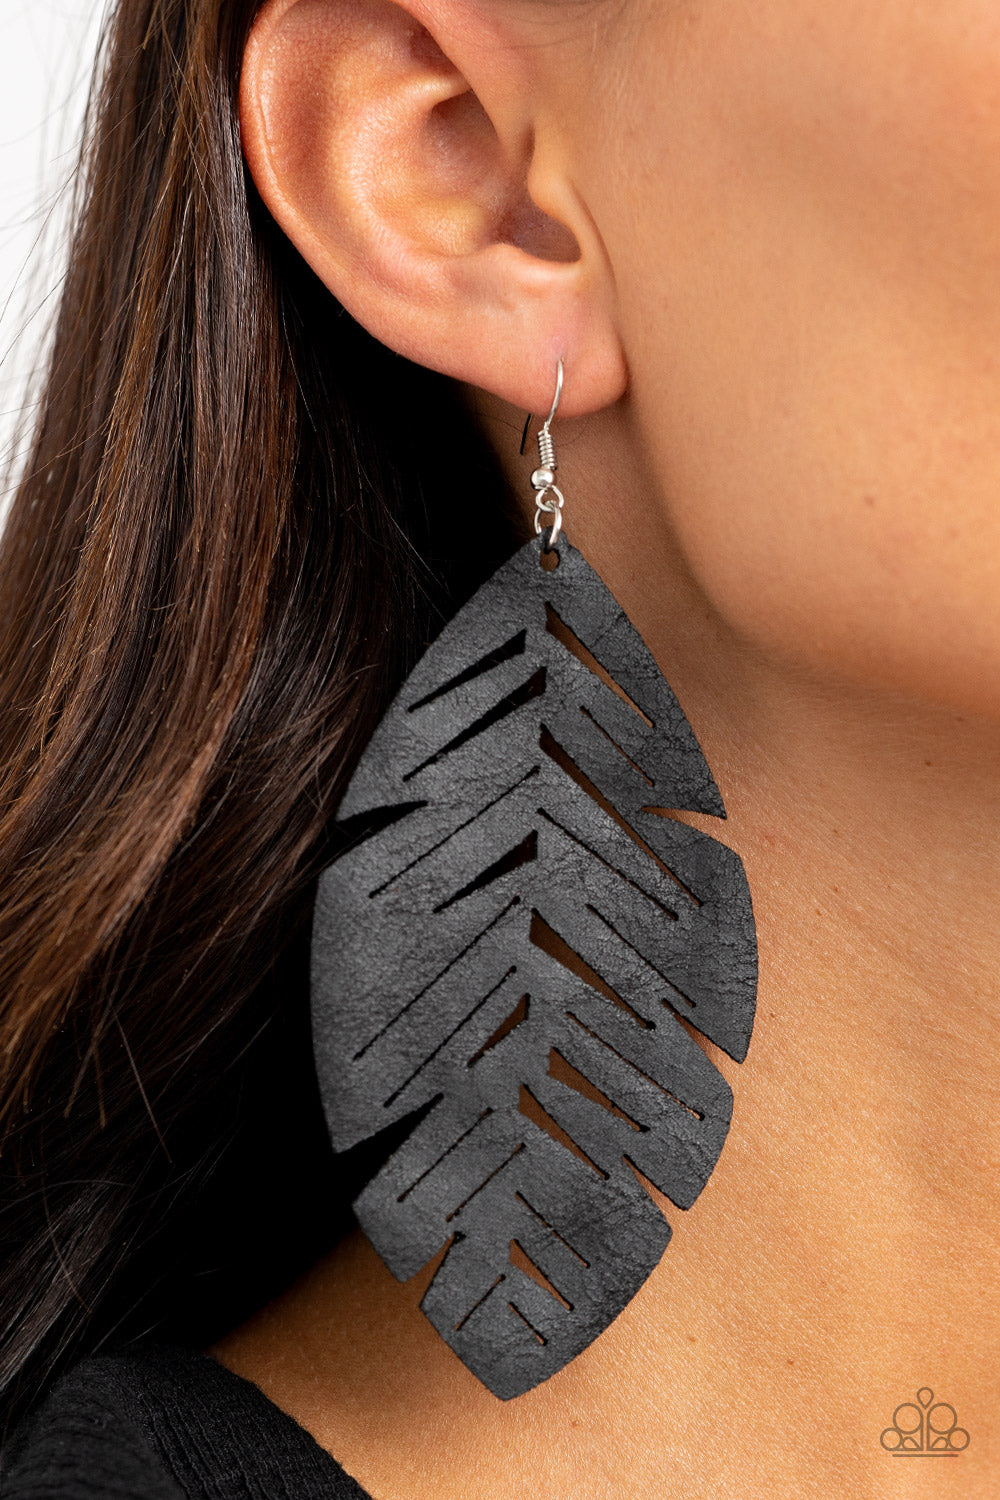 Paparazzi Accessories - I Want To Fly - Black Earrings - Alies Bling Bar